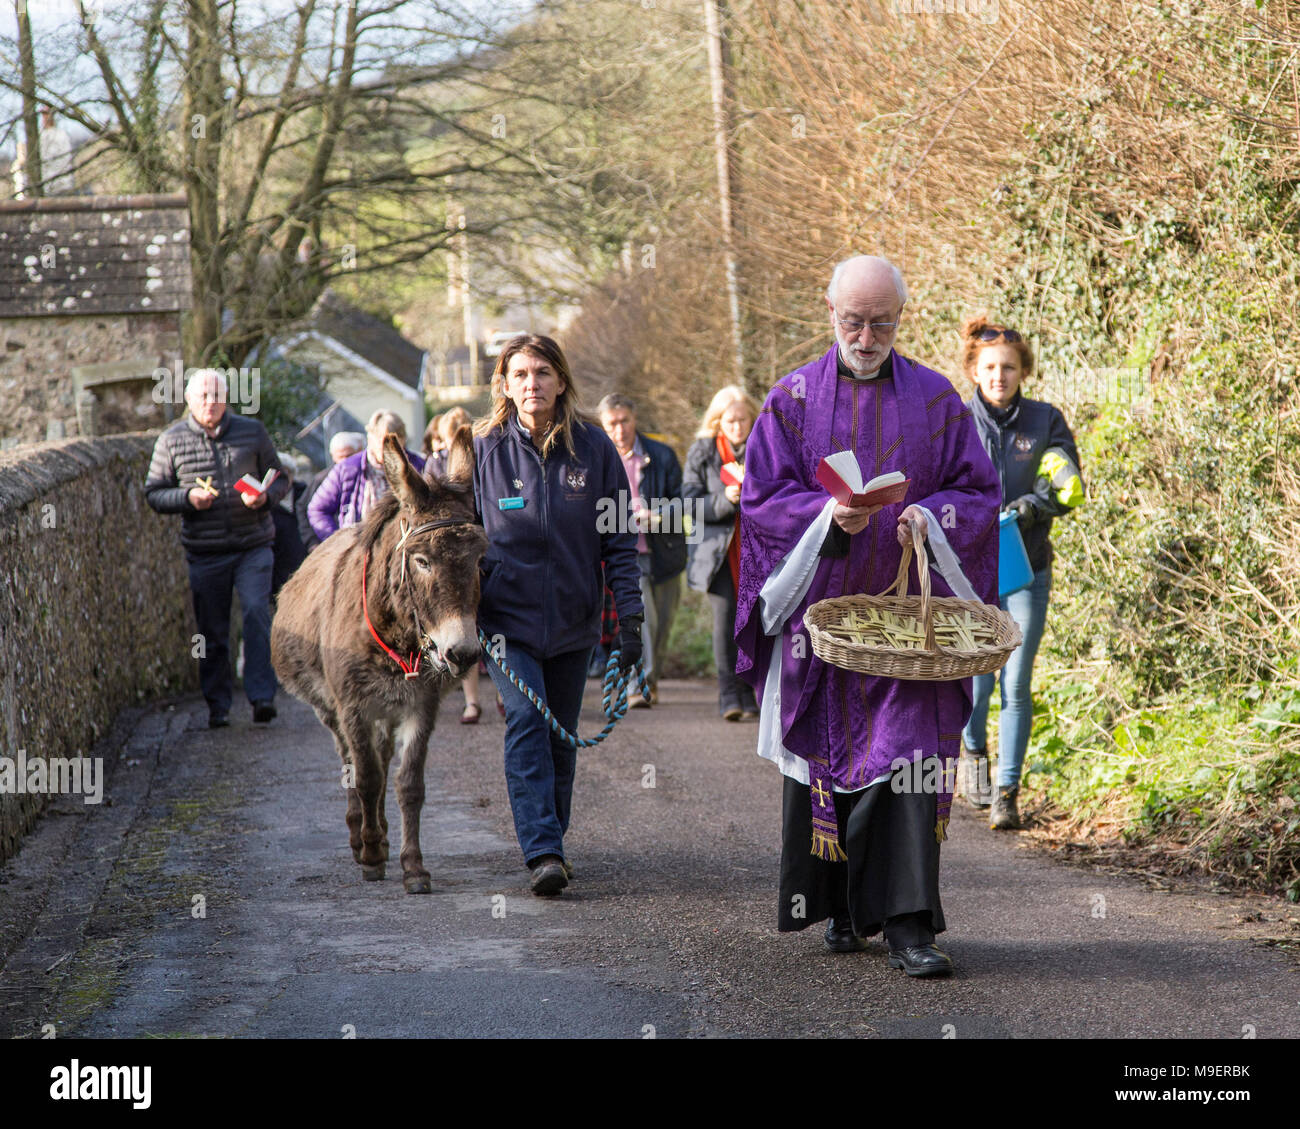 Sidmouth, UK,  25th Mar 18. Ponk the Donk took a starring roll at the Palm Sunday service at Salcombe Regis church, near Sidmouth. The annual event sees parishioners process up the hill, and this year the Rev David Lewis  headed the walk,  together with Ponk, a 14 year old donkey from the nearby Sidmouth Donkey Sanctuary. Photo Central / Alamy Live News. Credit: Photo Central/Alamy Live News Stock Photo